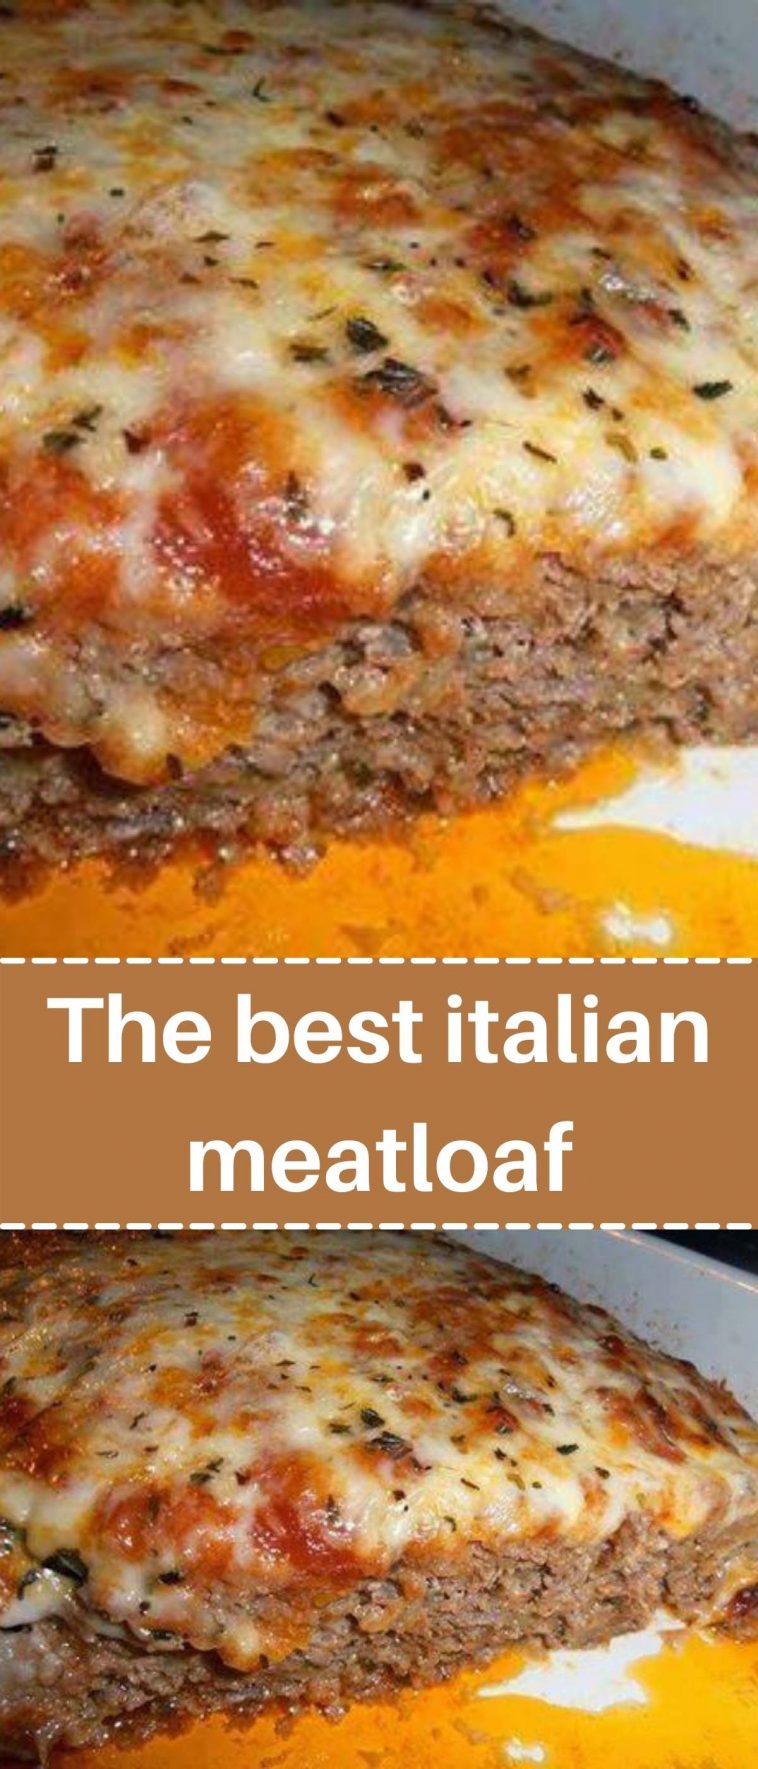 The best italian meatloaf